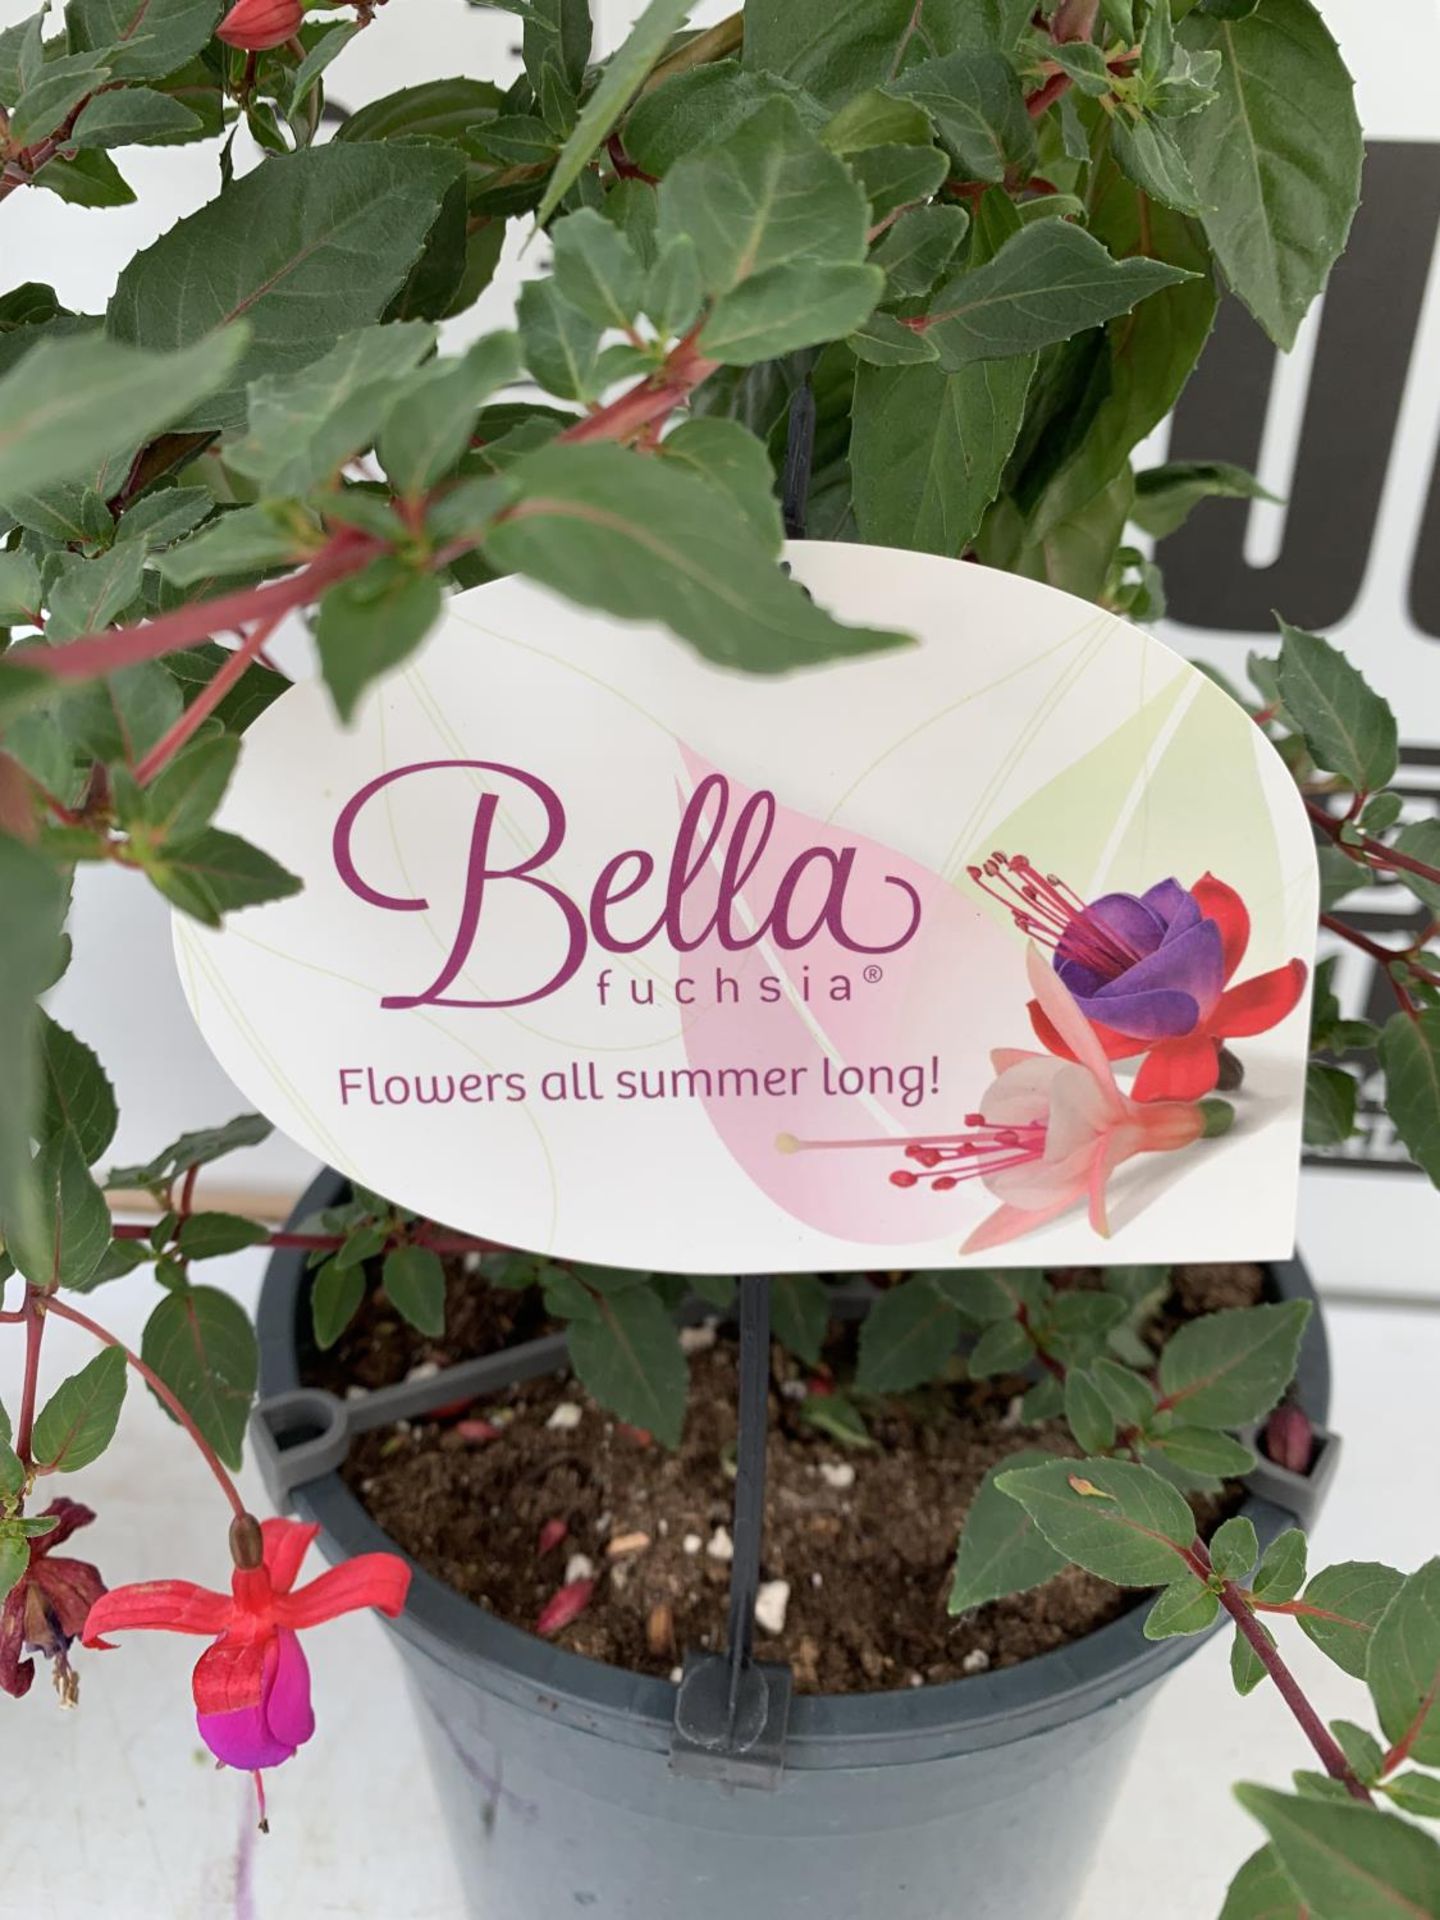 TWO BELLA STANDARD FUCHSIA IN A 3 LTR POTS 70CM -80CM TALL TO BE SOLD FOR THE TWO PLUS VAT - Image 7 of 8